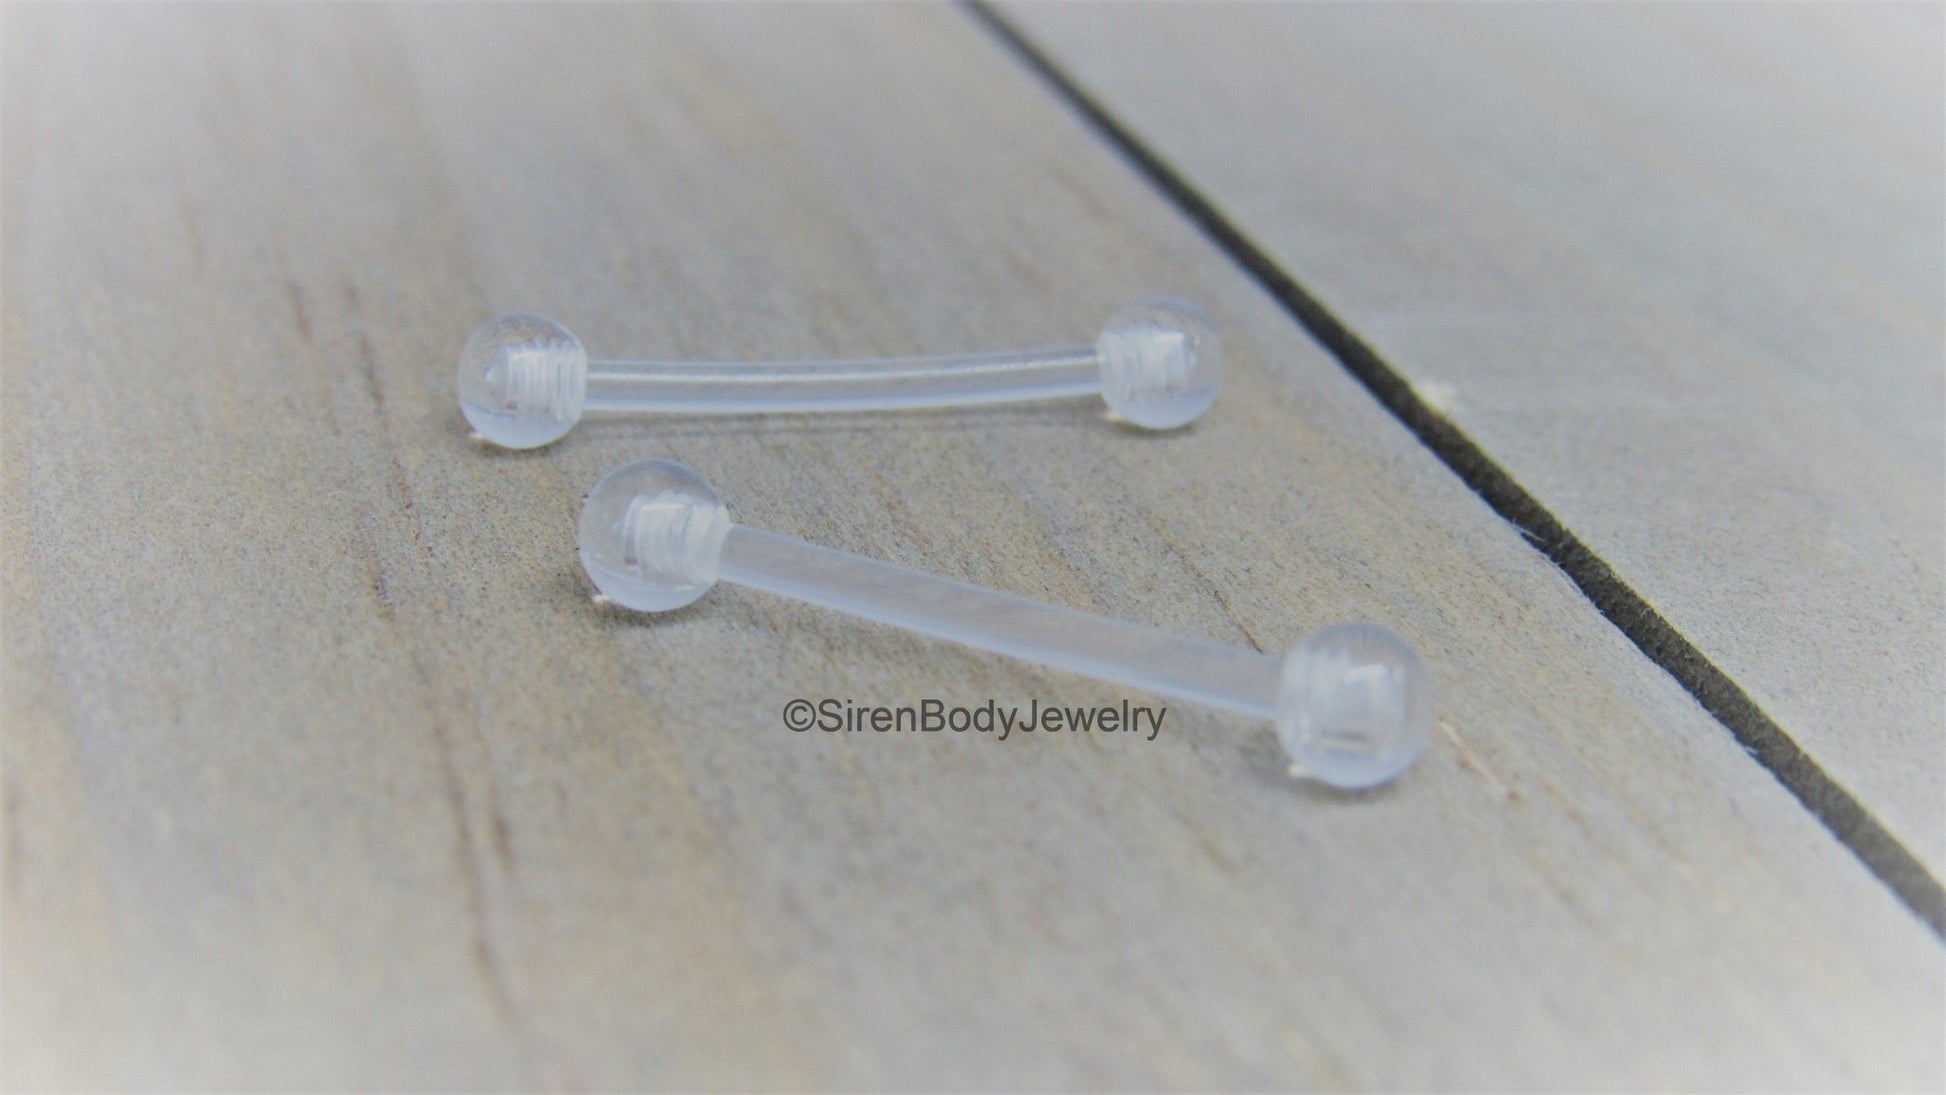 clear retainers for lip piercings